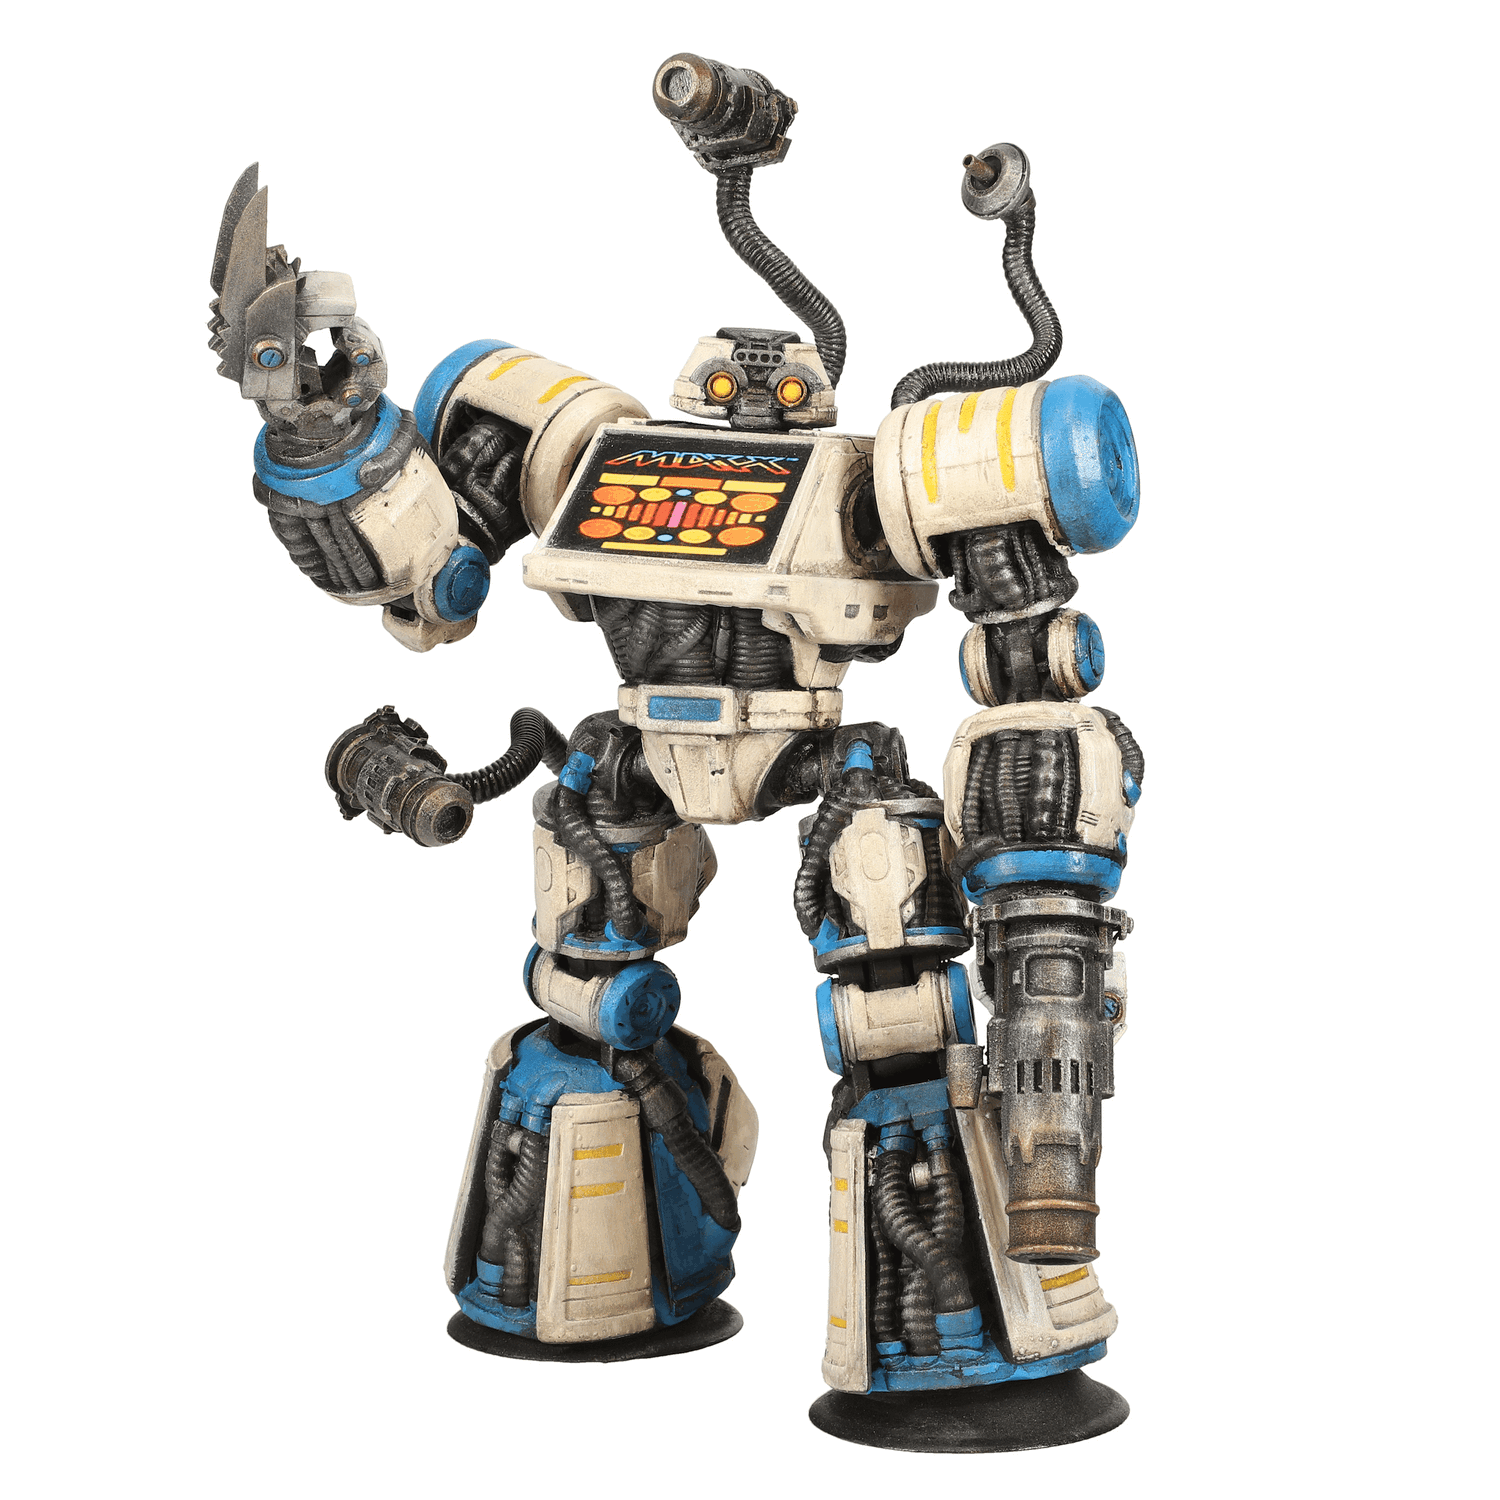 Maxx 89 collectible figure in artist rotating gif